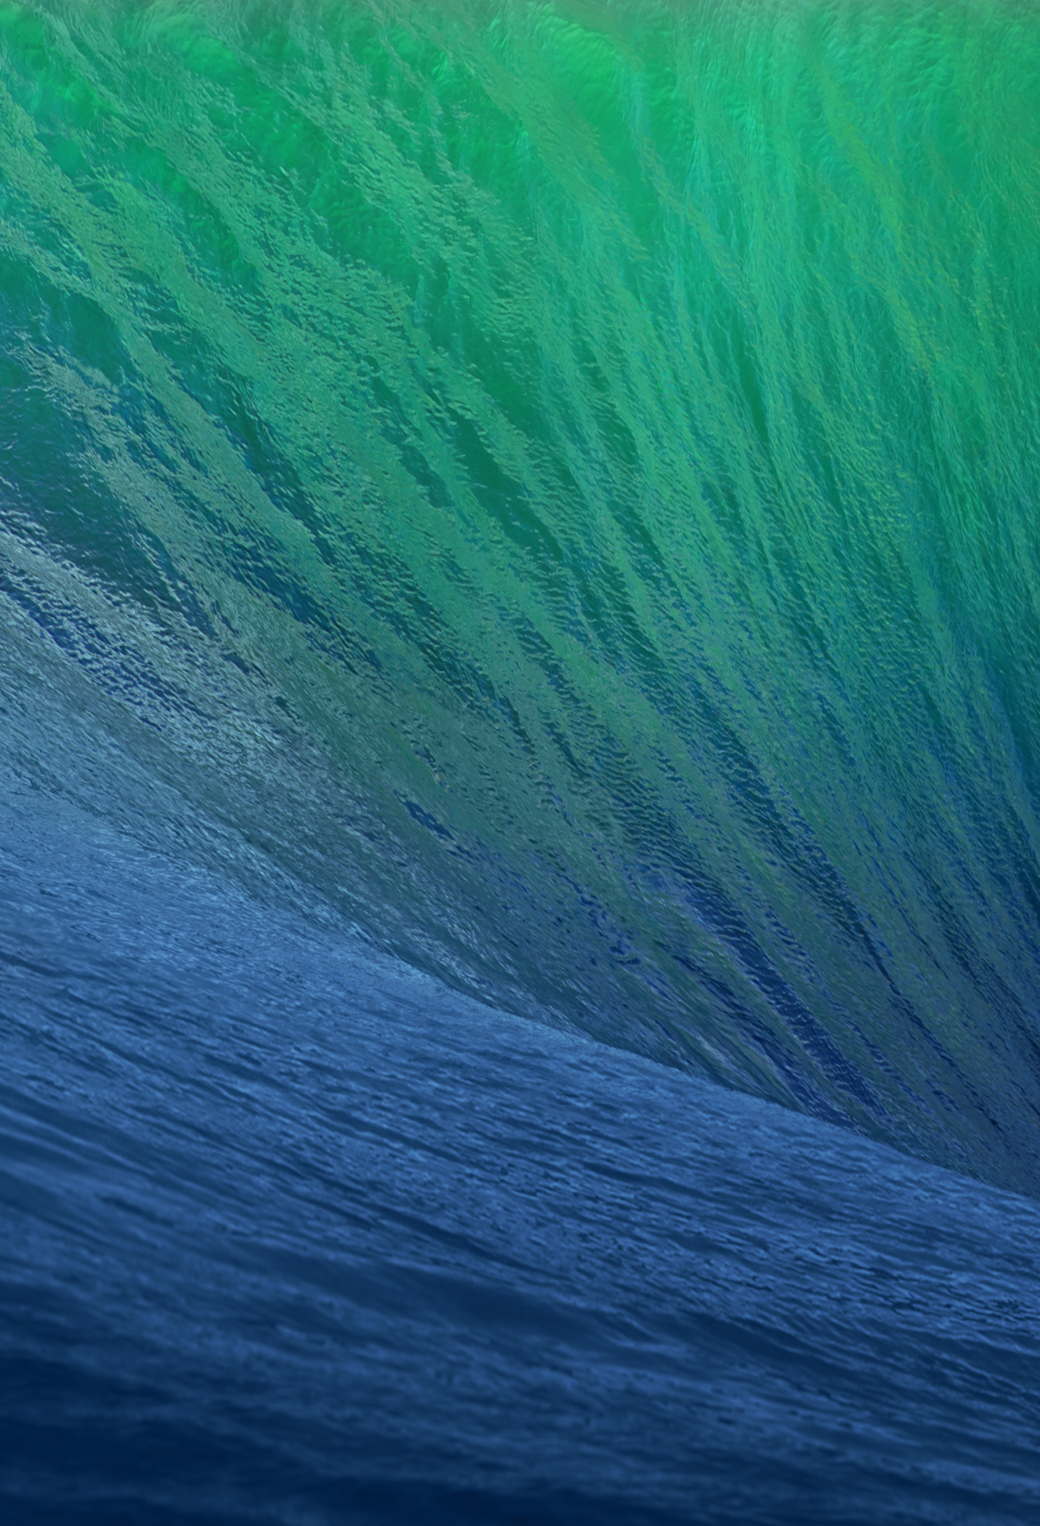 20 parallax iOS 7 wallpapers for iPhone ready to download for your